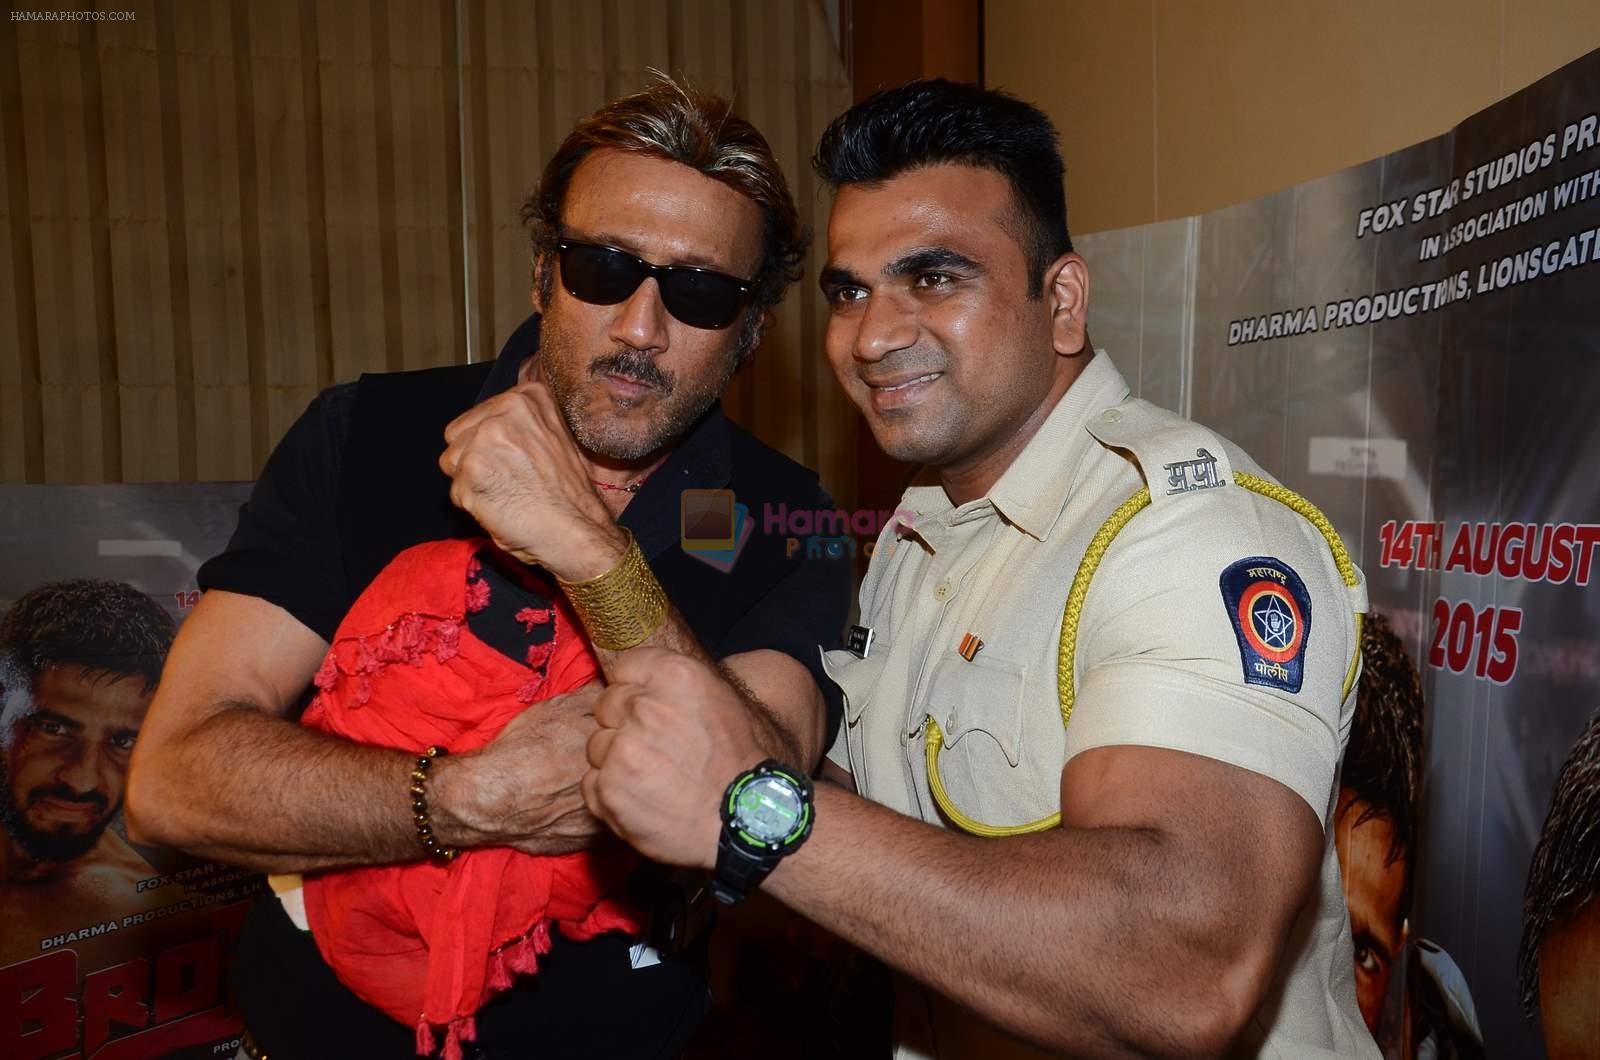 Jackie Shroff at Brothers promotion on 7th Aug 2015